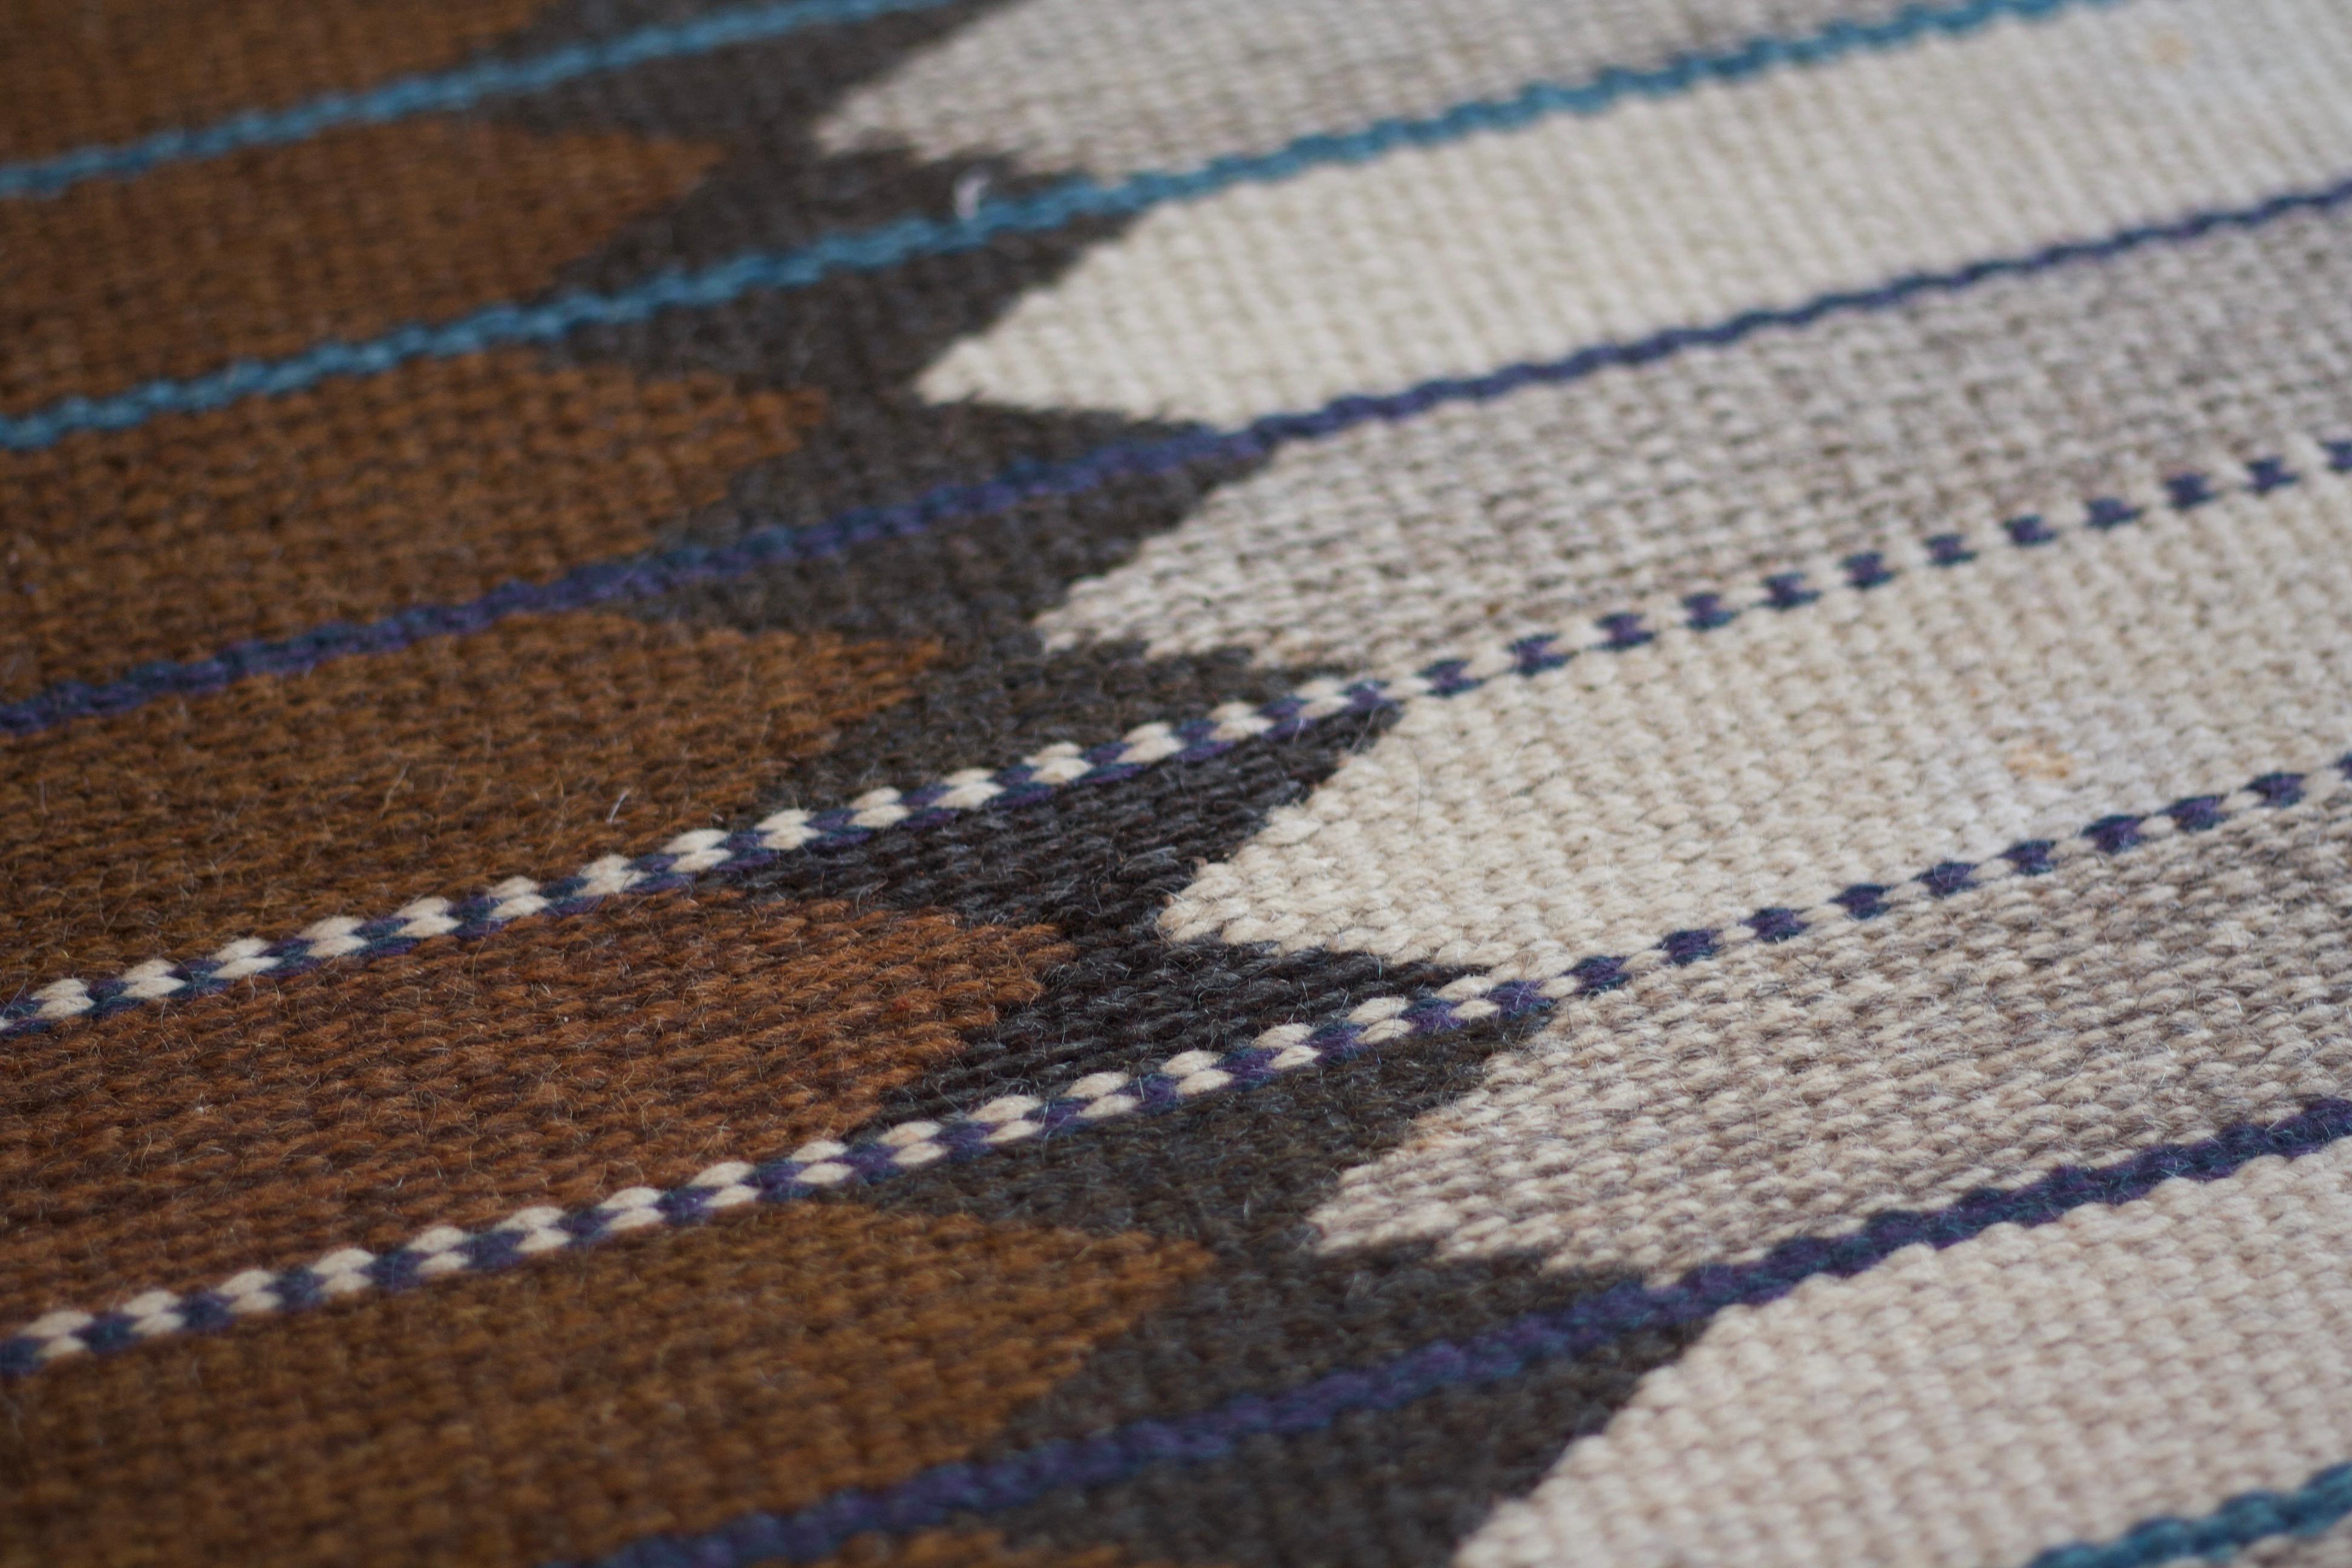 Hand-Woven Flat-weaved Double Sided Swedish Rug by Ingrid Dessau, Mid-20th Century